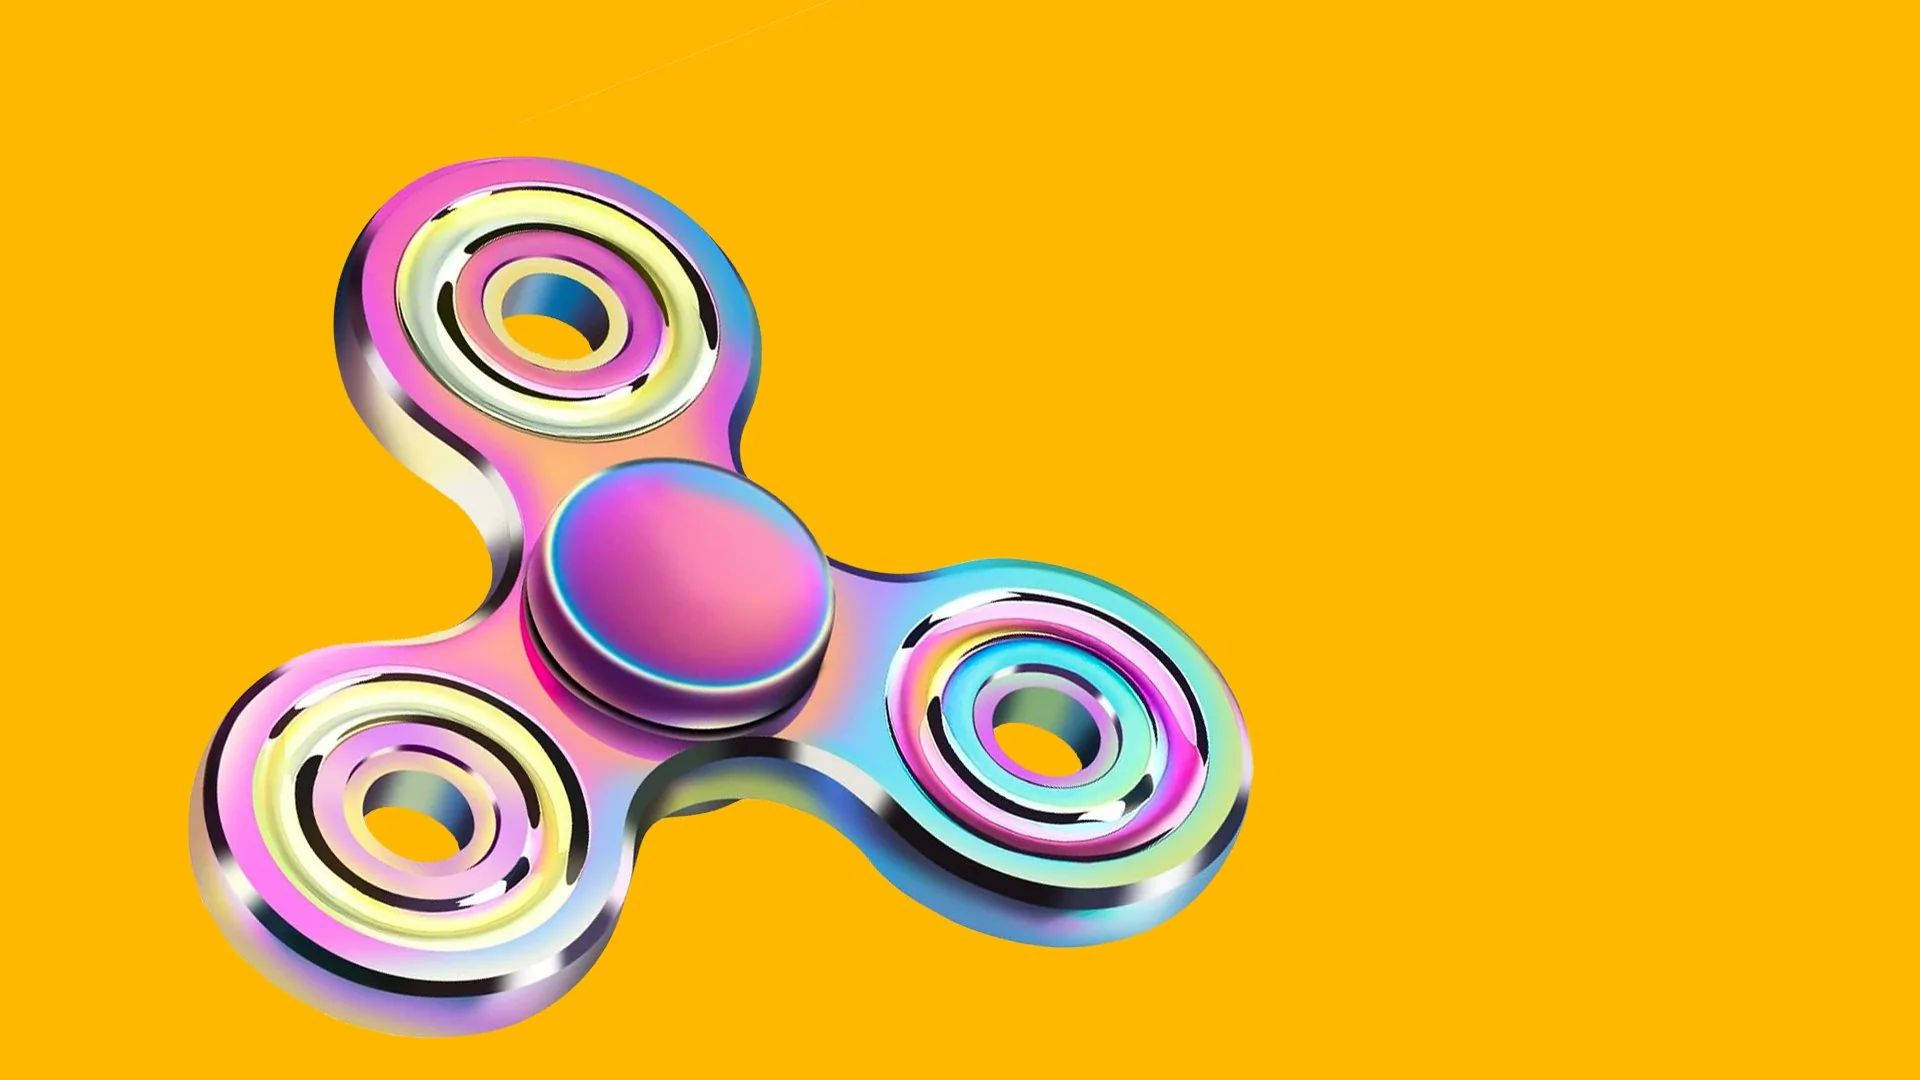 Caption: Colorful Fidget Toy On A Gradient Background Background